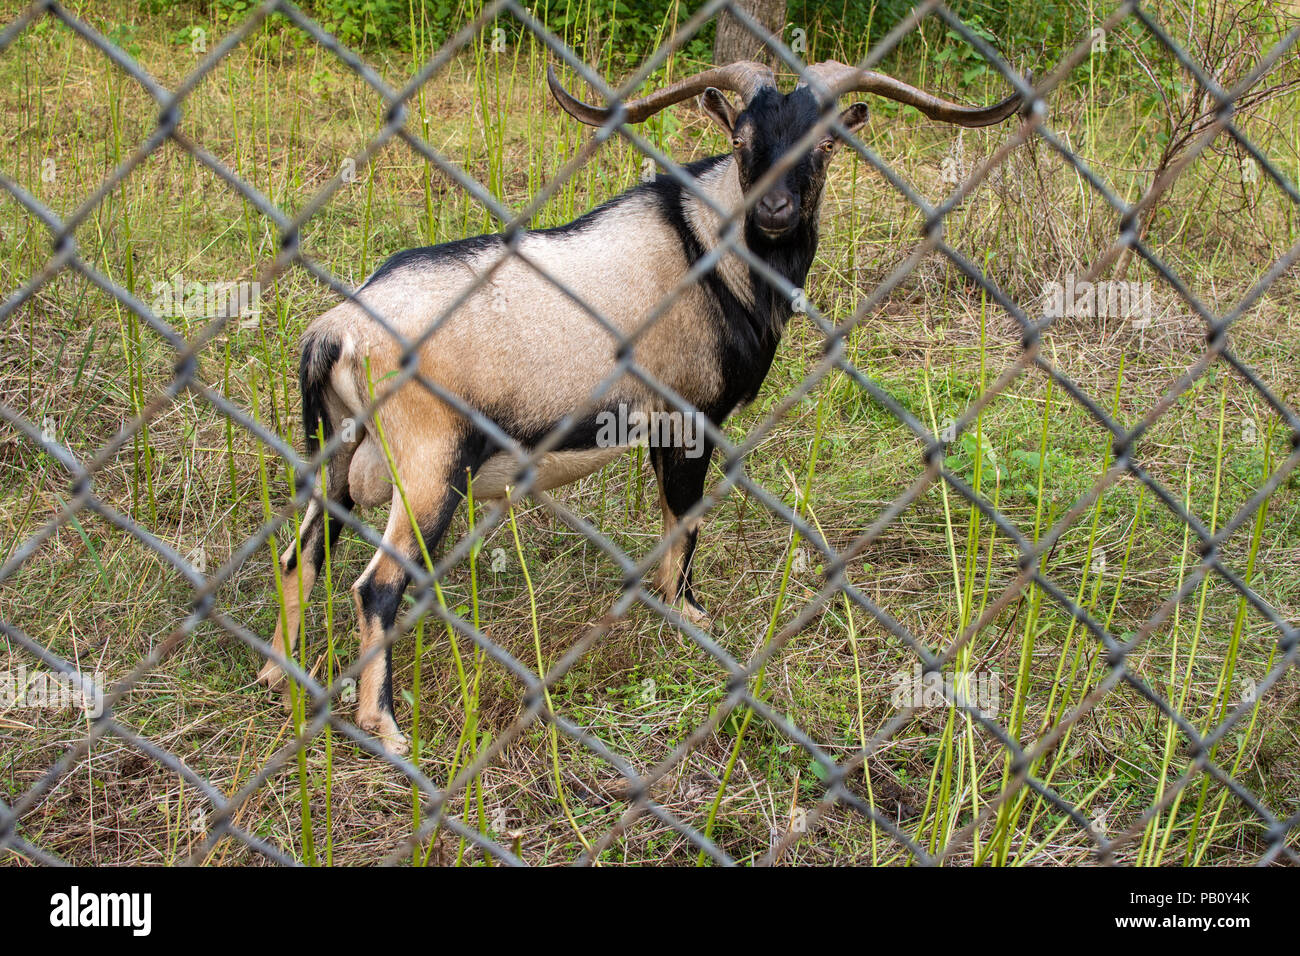 Long-horned goat behind fence Stock Photo